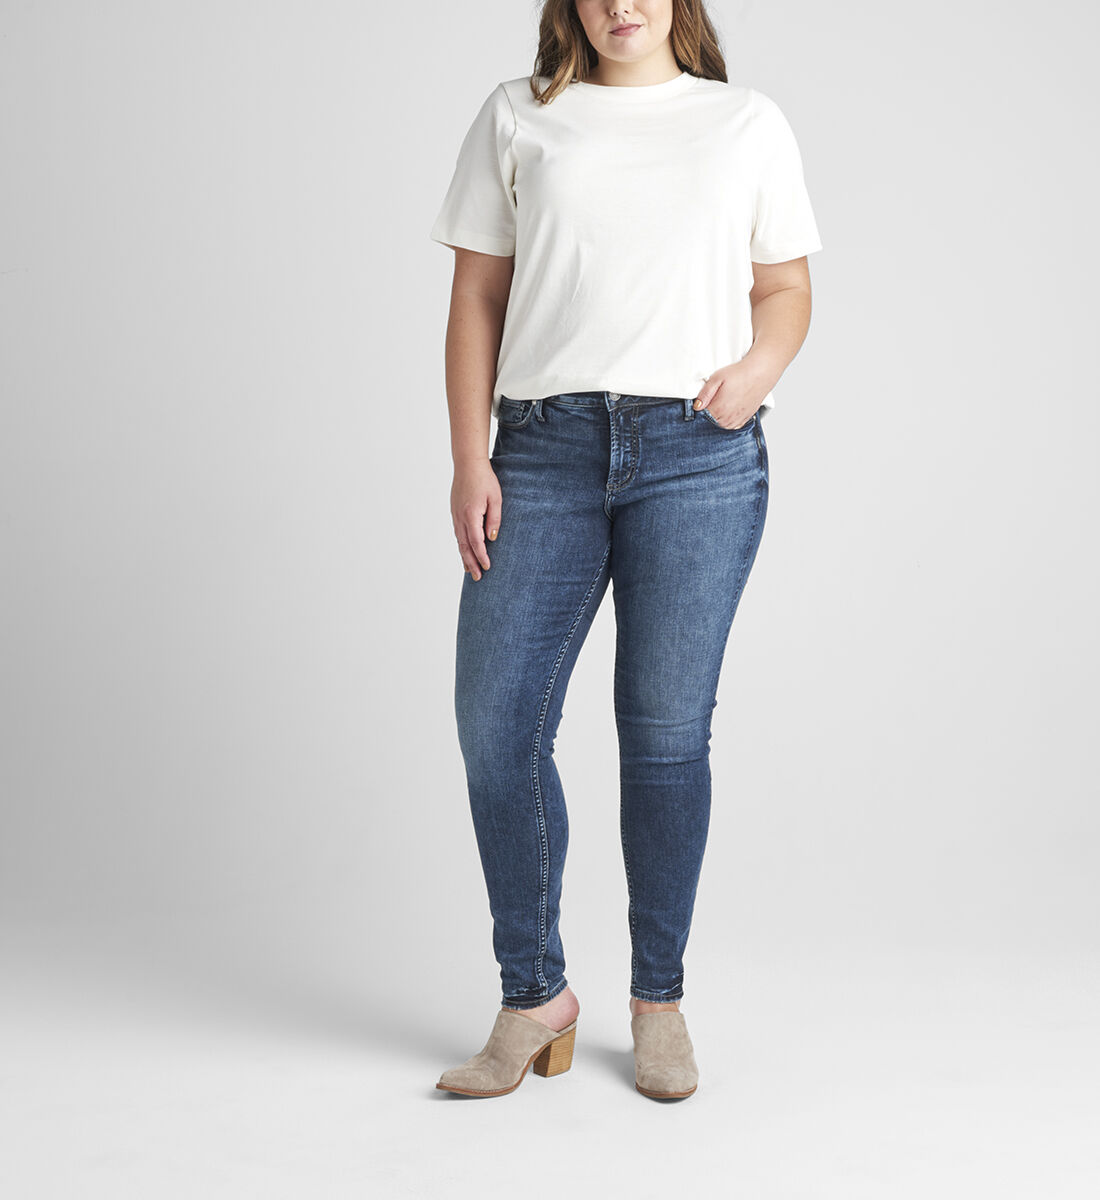 Elyse Mid Rise Skinny Jeans Plus Size Front